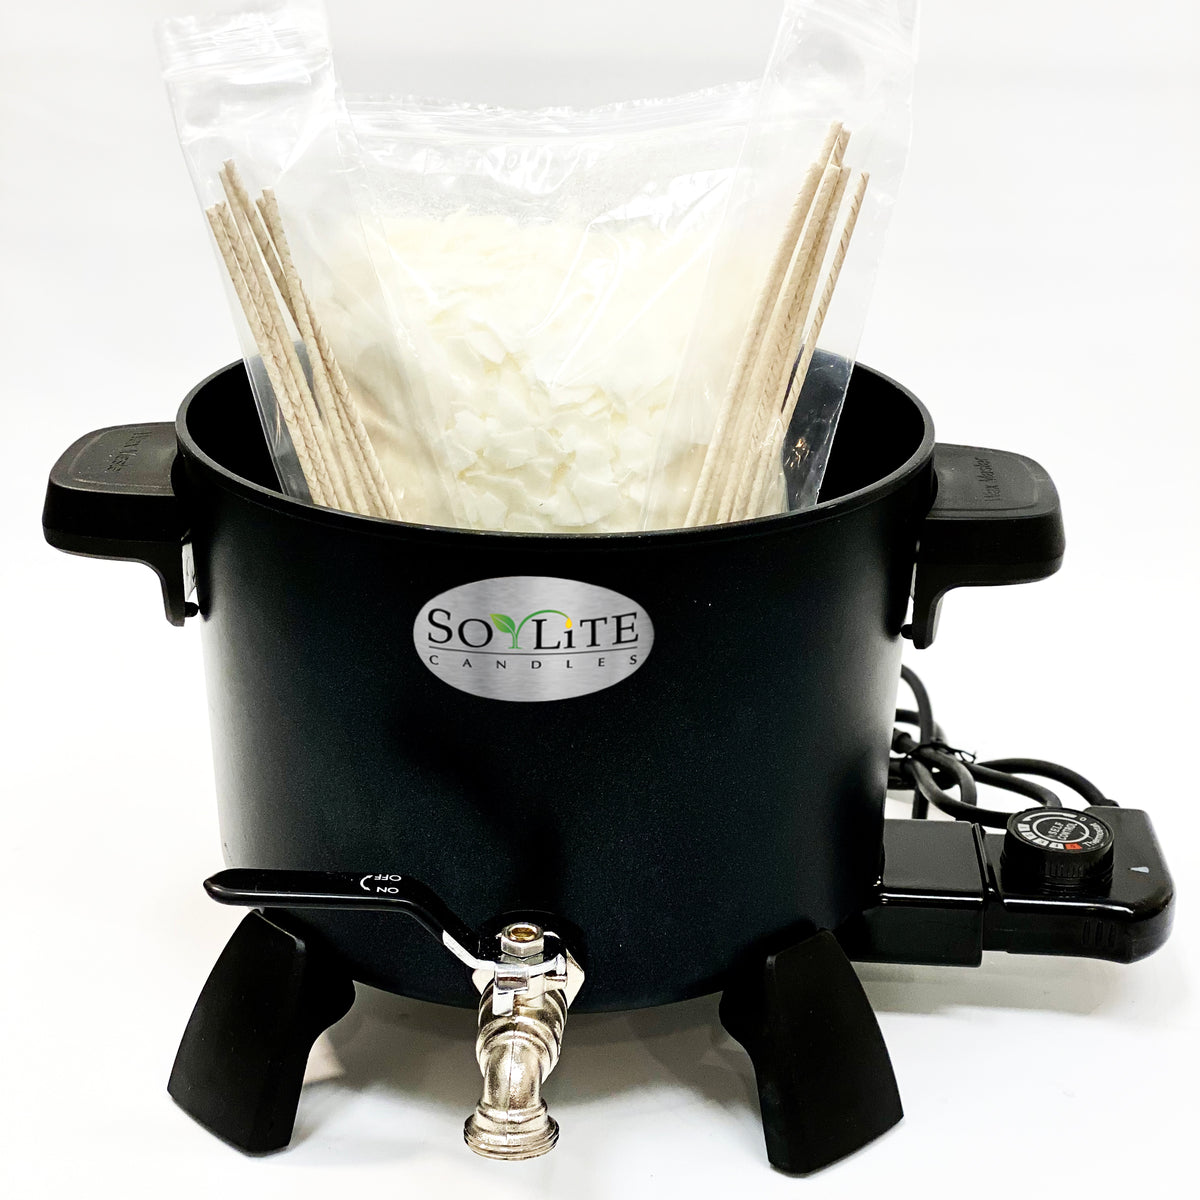 New Design Electric Wax Melter for Candle Making, 7 Qts (14 Lbs), Soy Wax  Melting Pot Kit with Quick Pour Valve